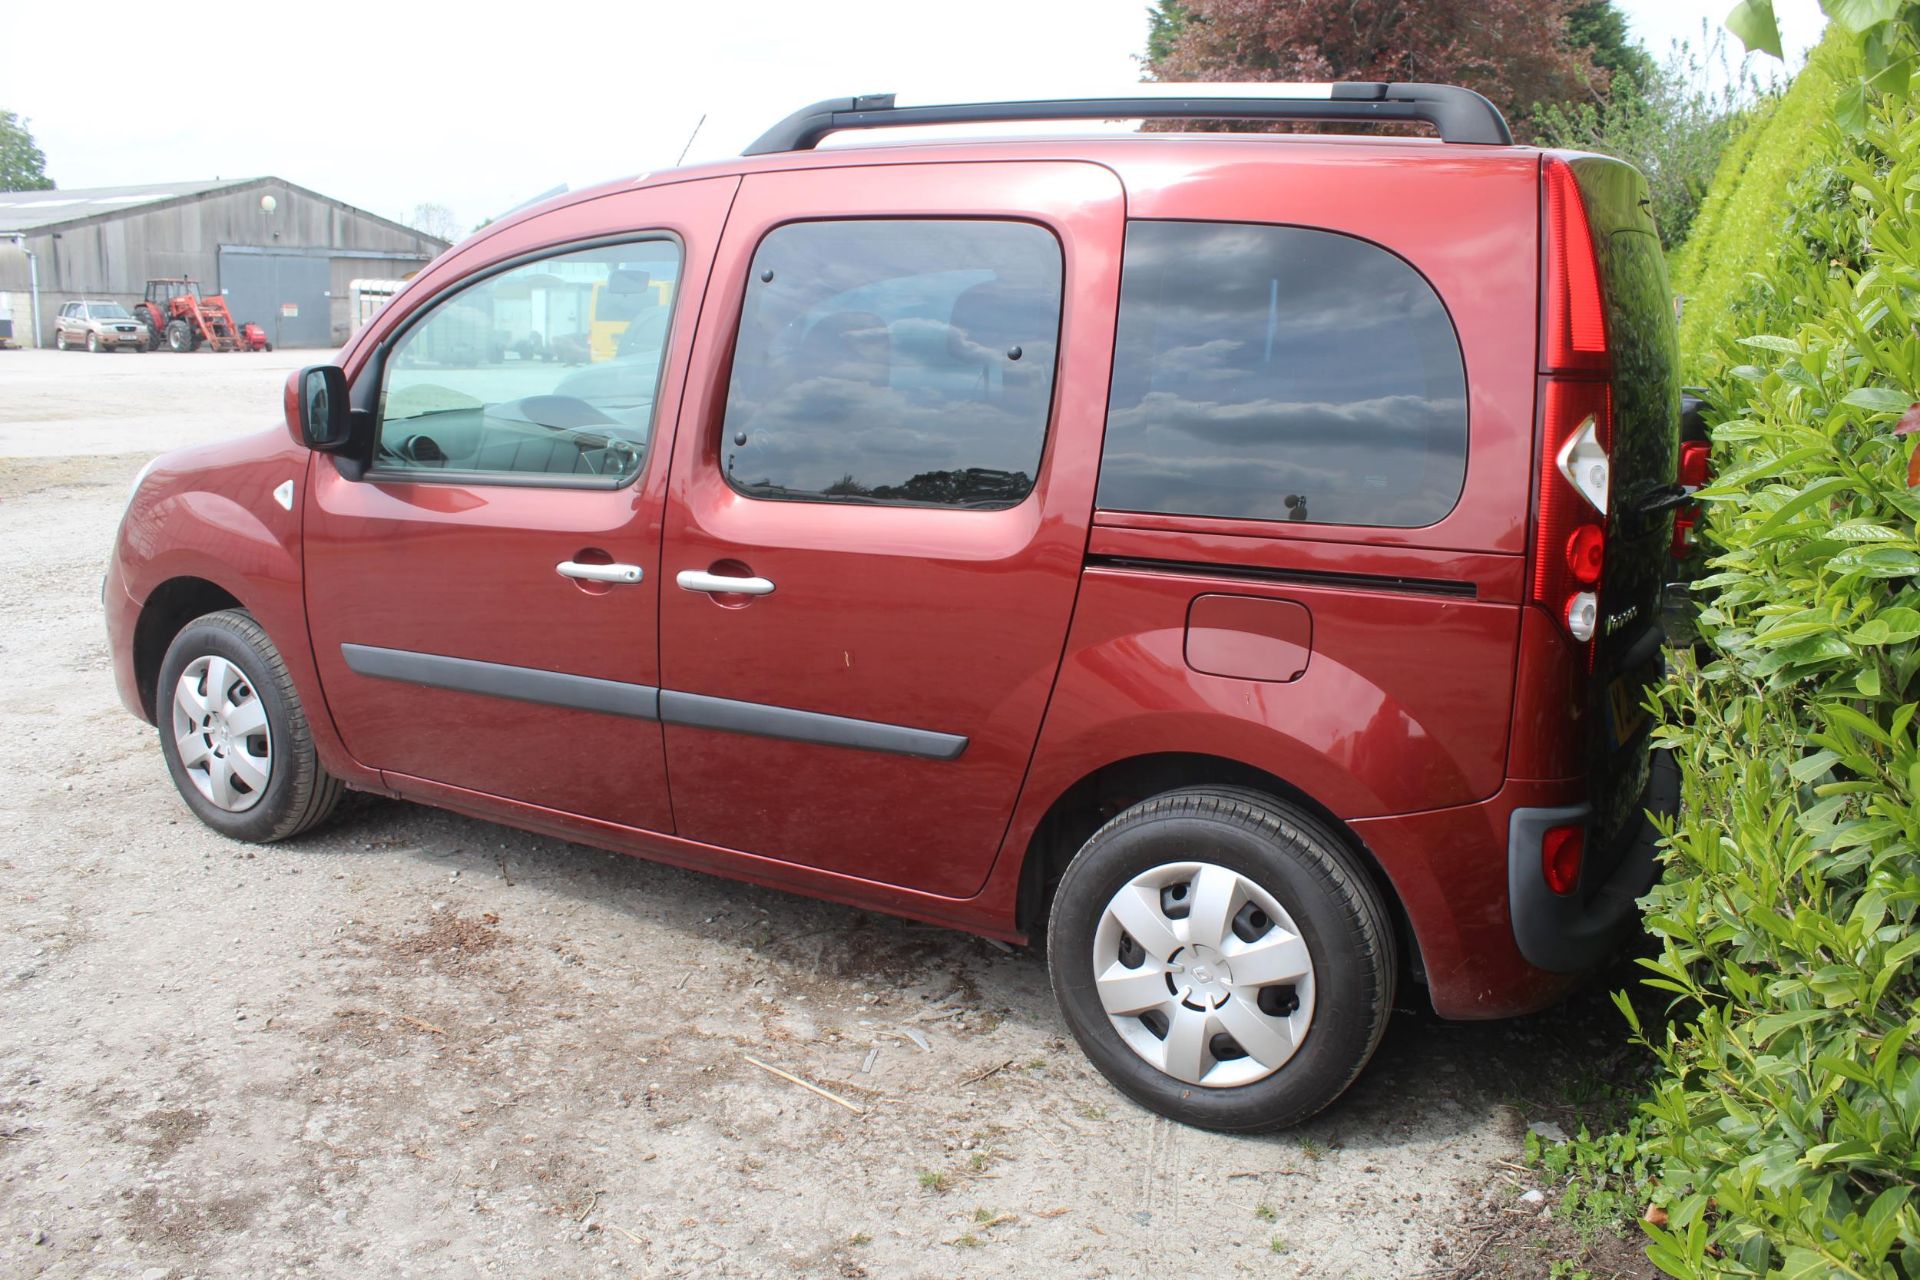 A RED 5DR RENULT KANGOO 16V PETROL AUTO EXPRESSION, FIRST REGISTERED IN SEPTEMBER 2012 WITH AN MOT - Image 3 of 3